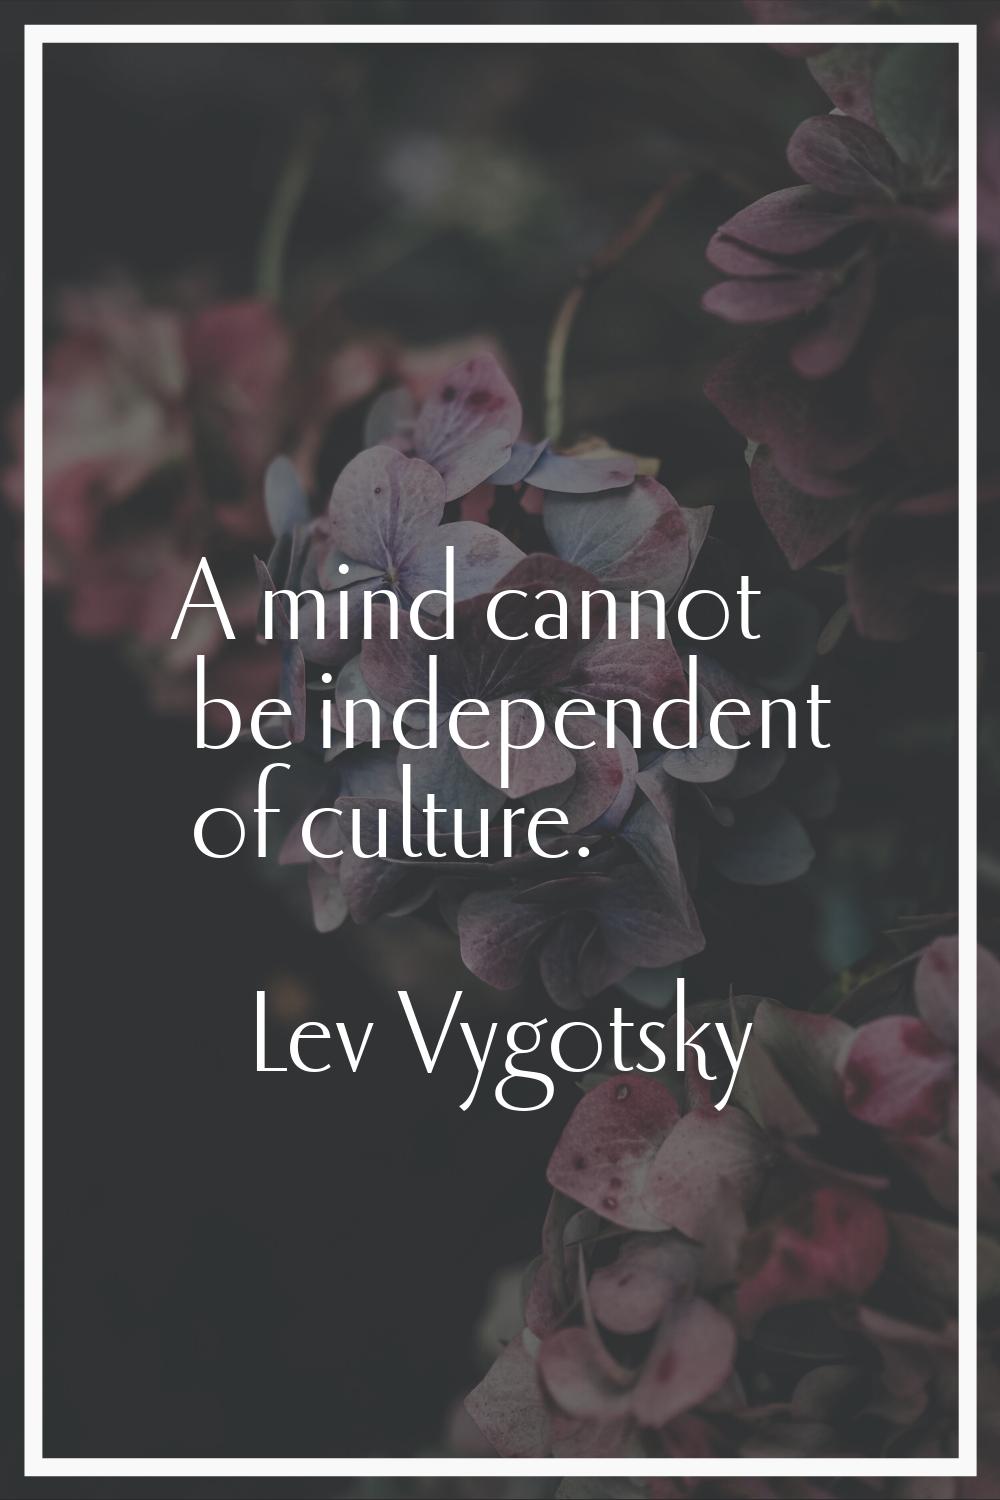 A mind cannot be independent of culture.